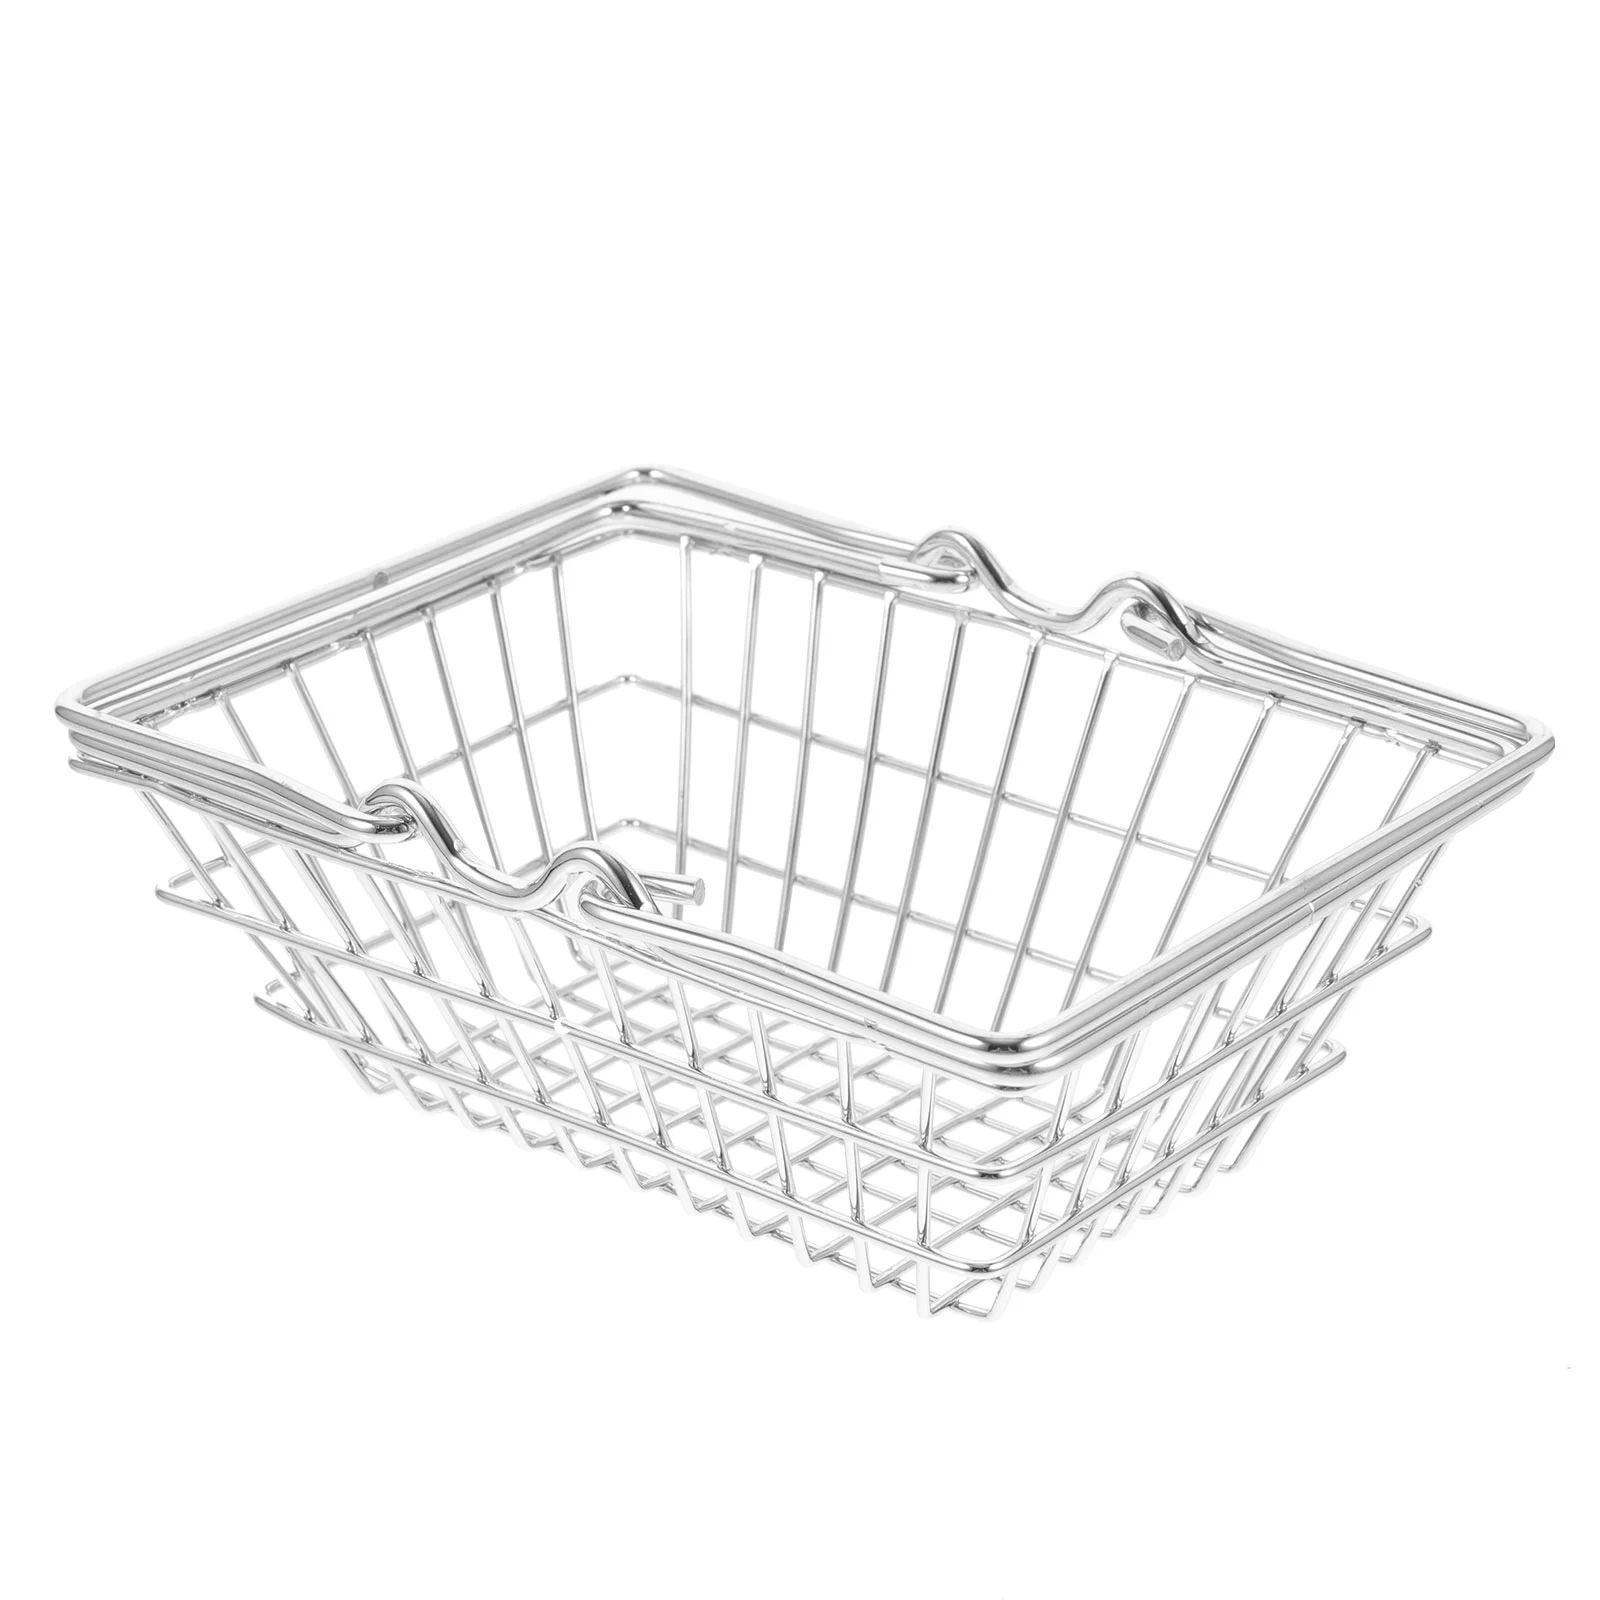 

Shopping Cart Basket Mini Baskets Toy Storage Grocery Supermarket Wire Cashier Mesh Shower Trolley Organizing Food Day Sundries